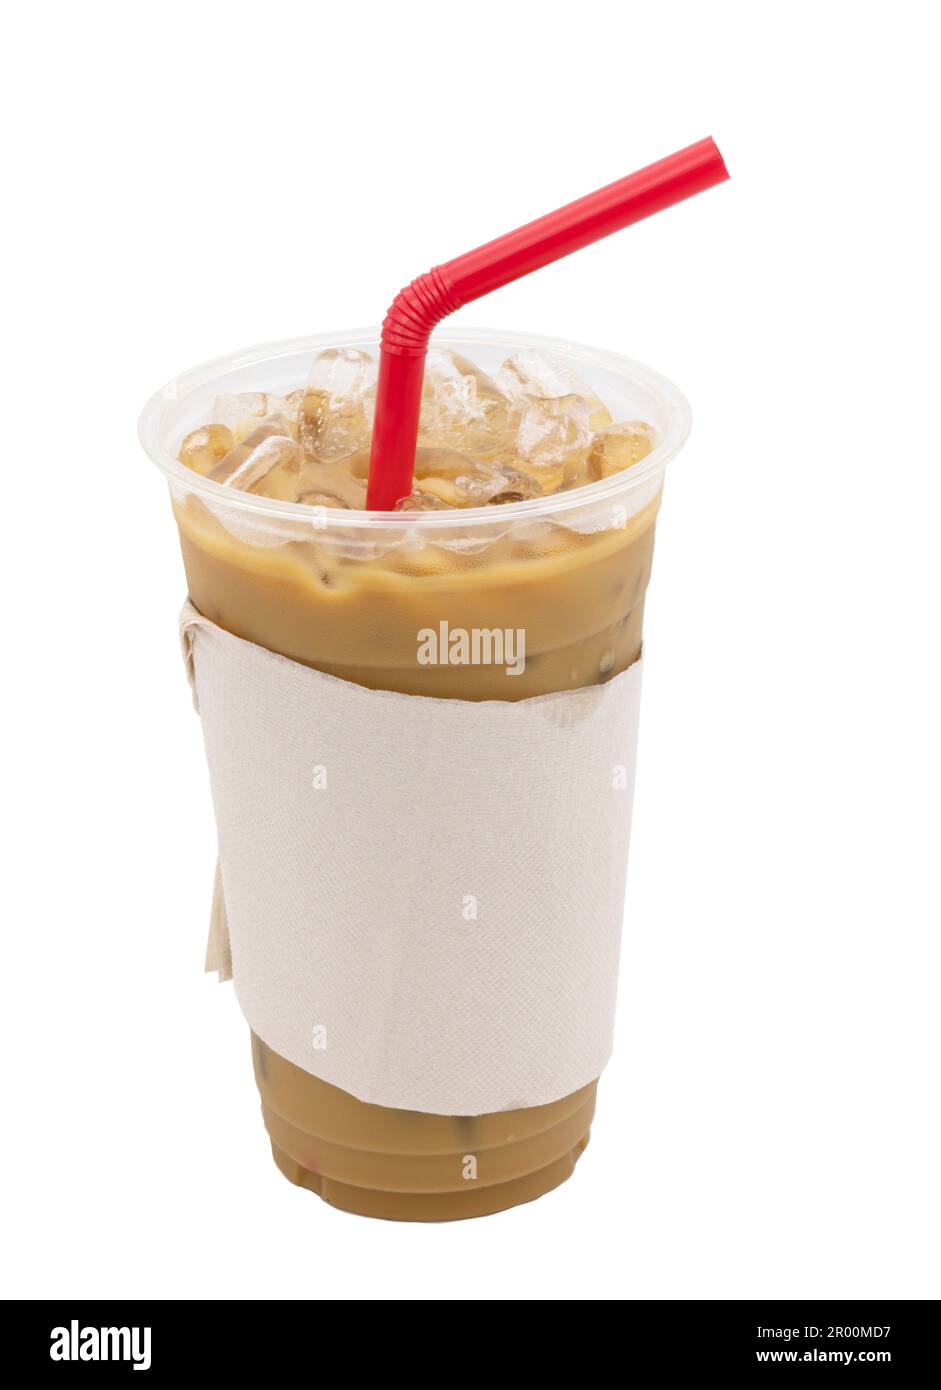 https://c8.alamy.com/comp/2R00MD7/coffe-cup-with-red-straw-isolated-on-white-background-2R00MD7.jpg